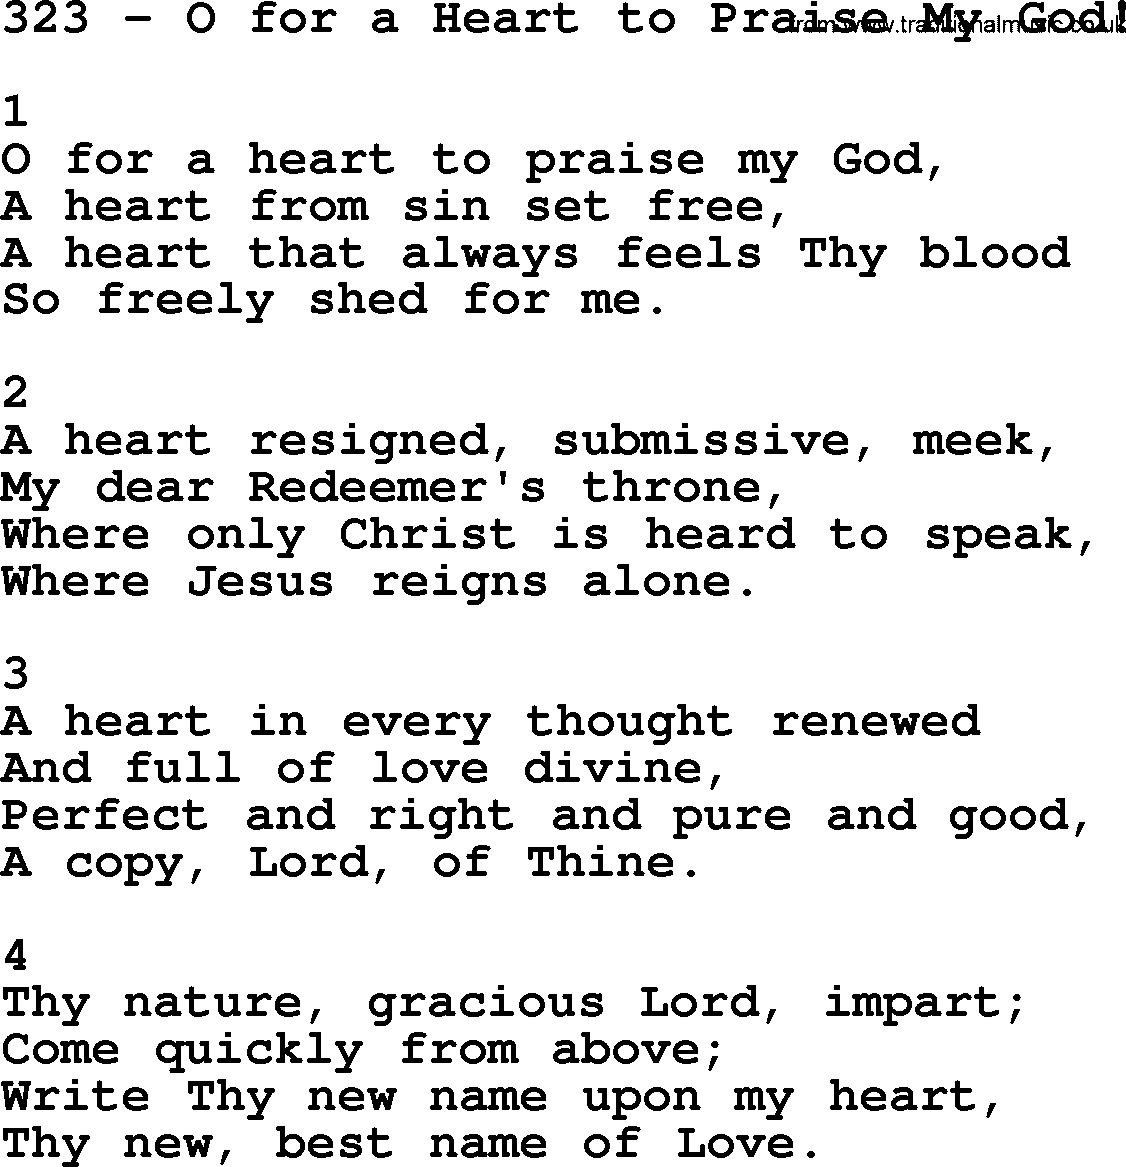 Complete Adventis Hymnal, title: 323-O For A Heart To Praise My God!, with lyrics, midi, mp3, powerpoints(PPT) and PDF,